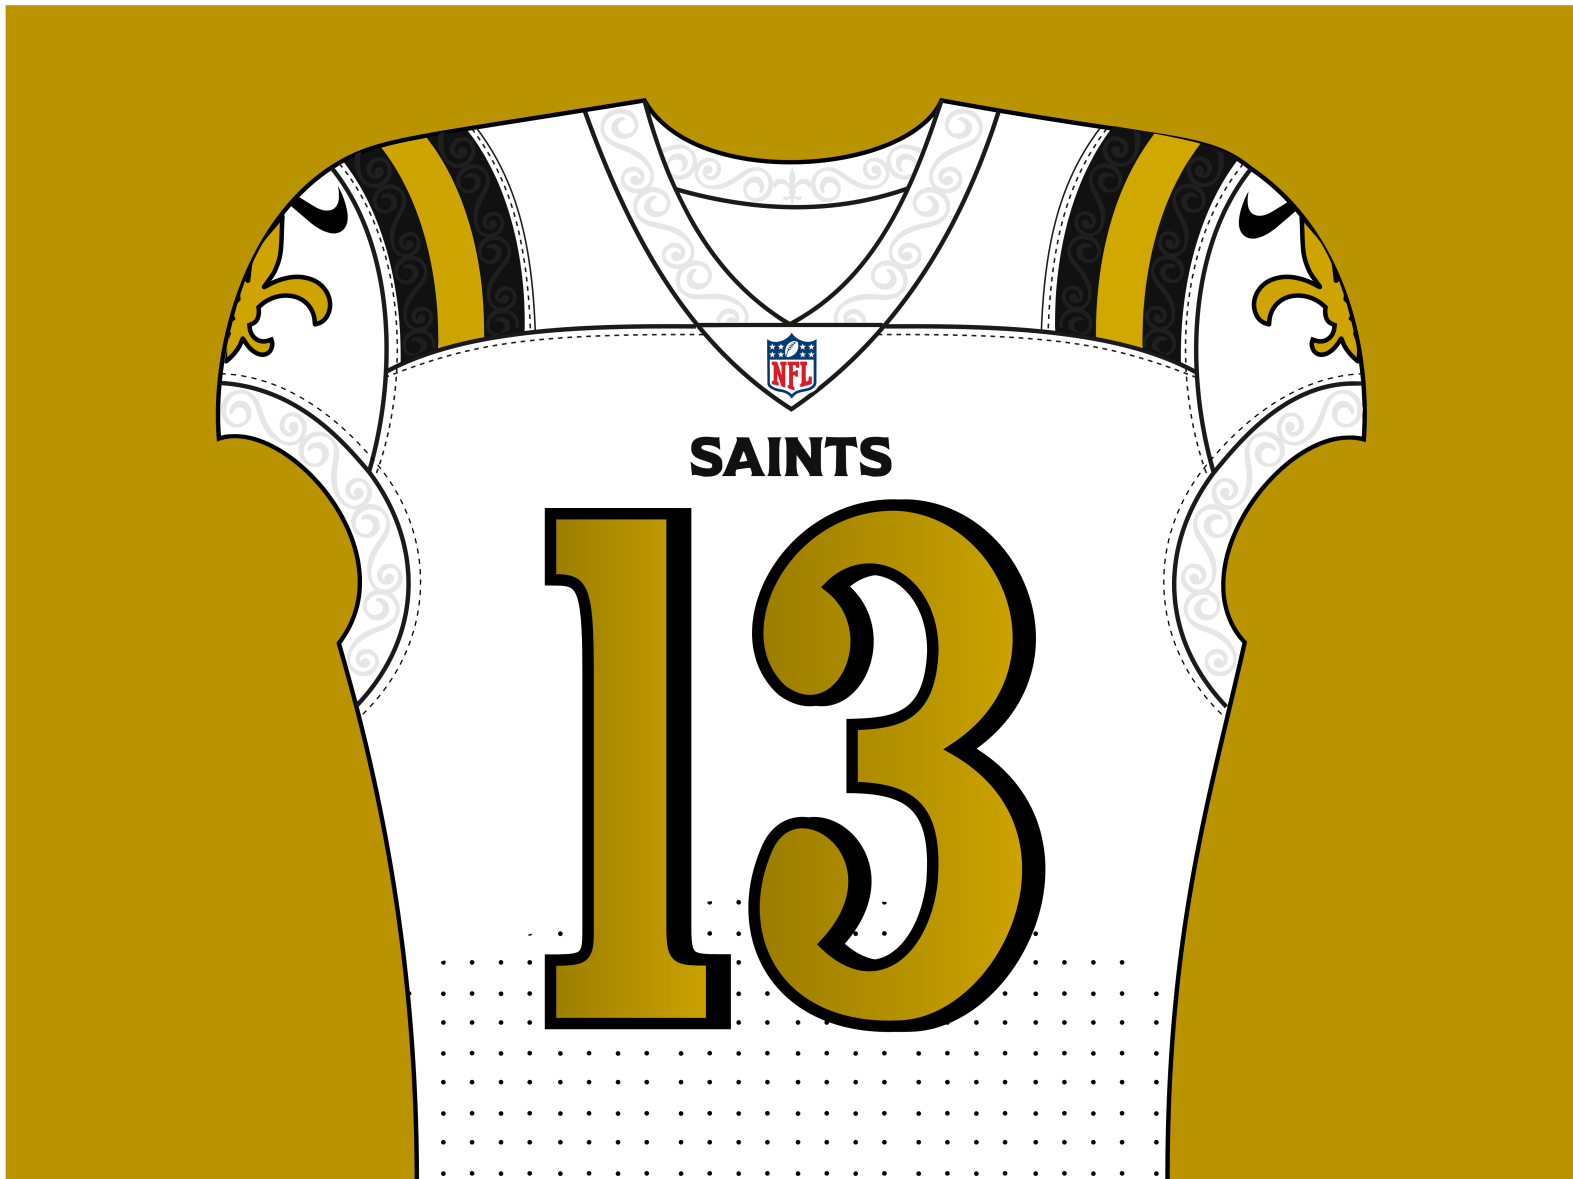 SaintsNations⚜️ (@saintsnations) added a photo to their Instagram account:  “#Saints jersey redesign by @ultimateeffects 